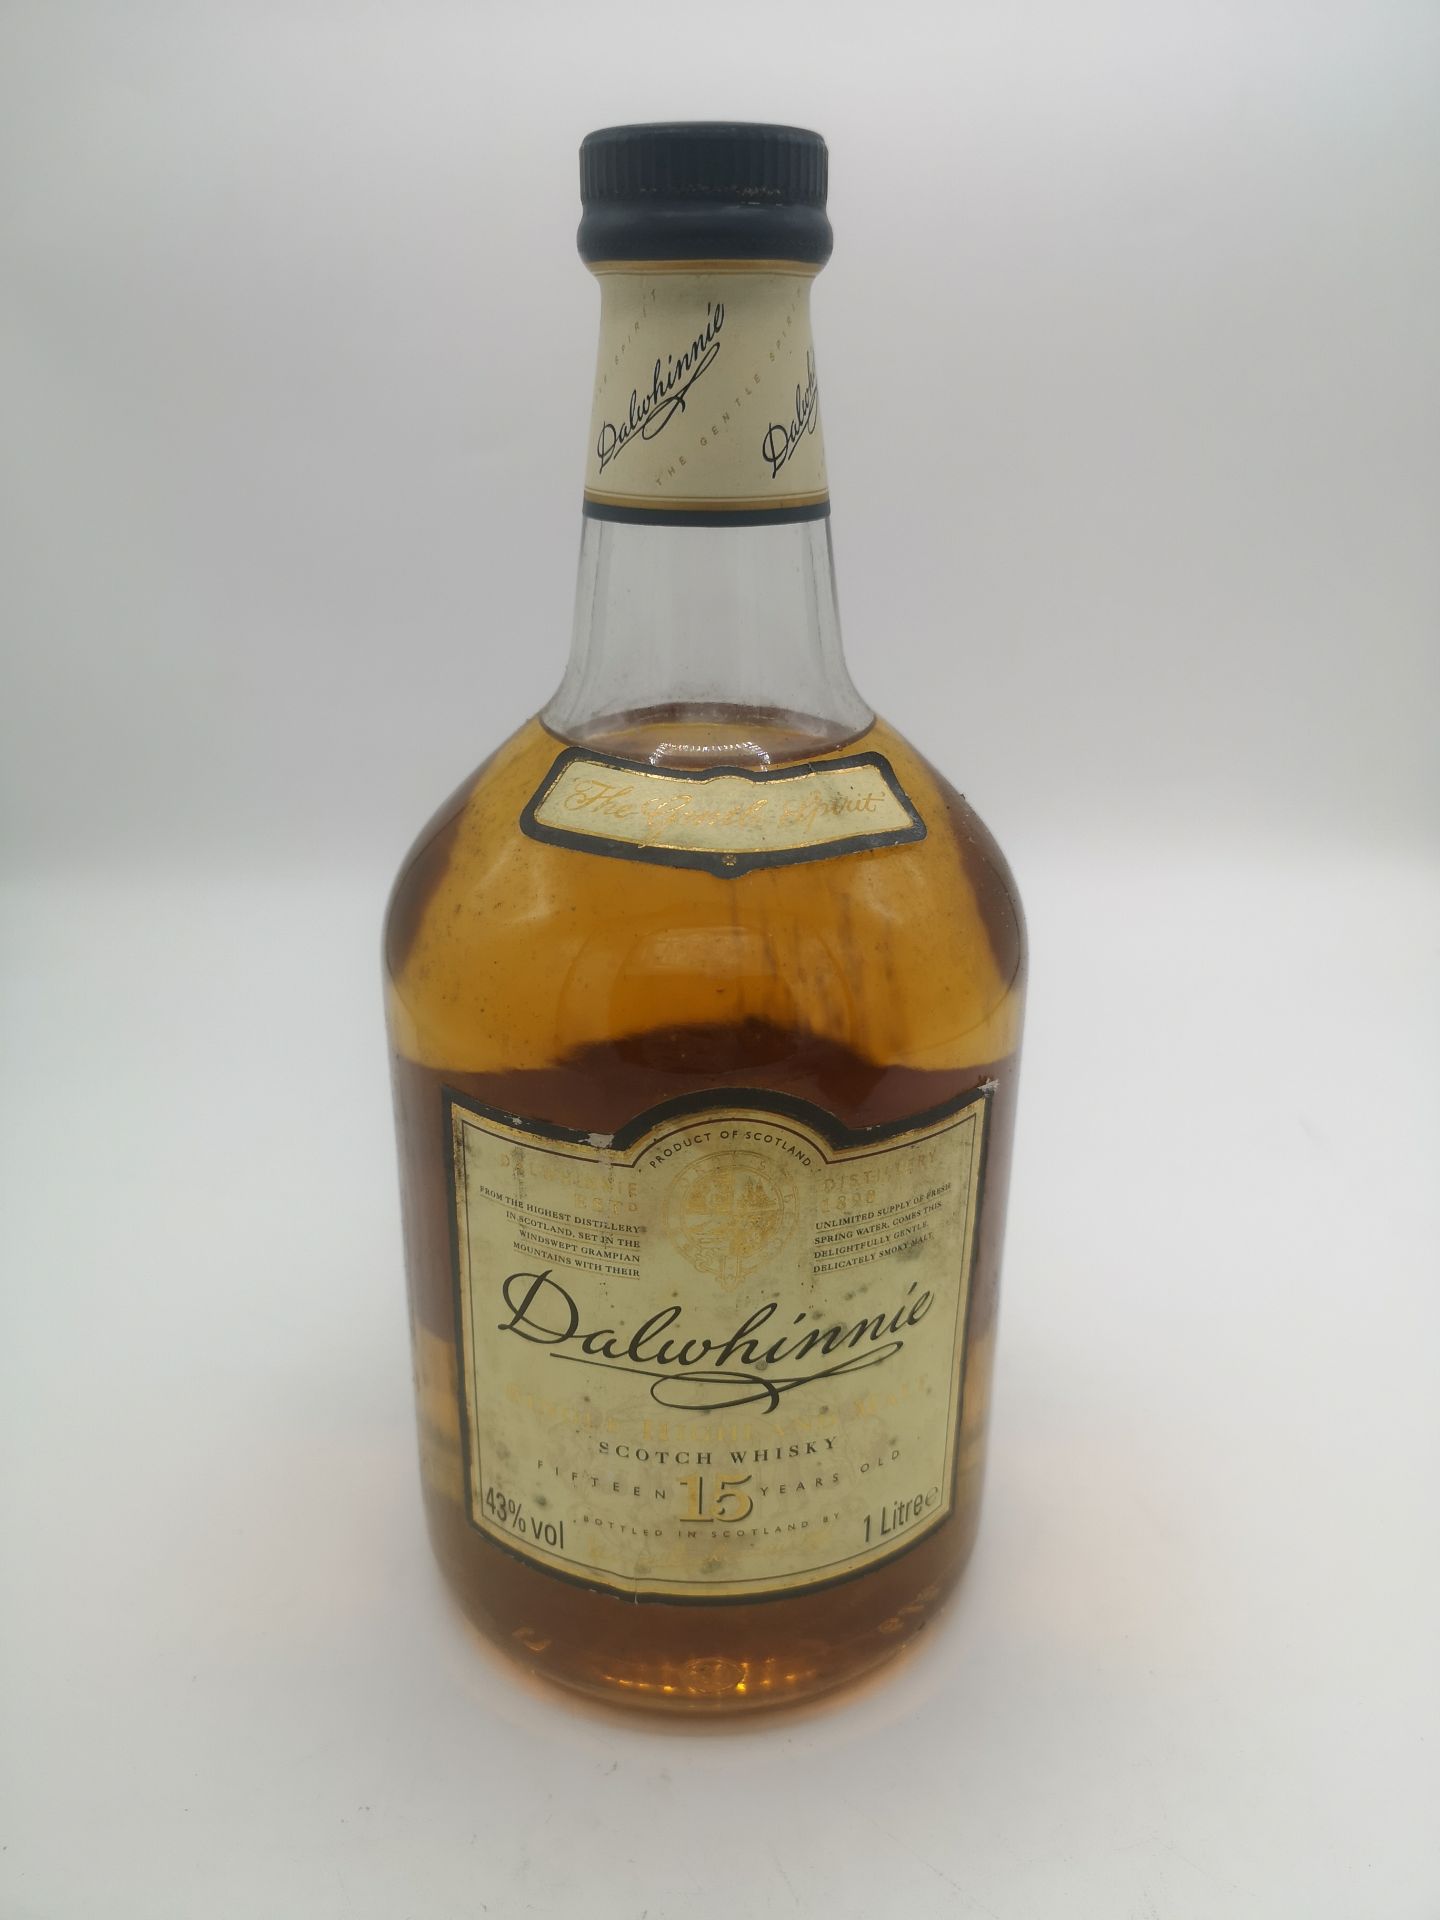 1l bottle of Dalwhinnie Scotch whisky